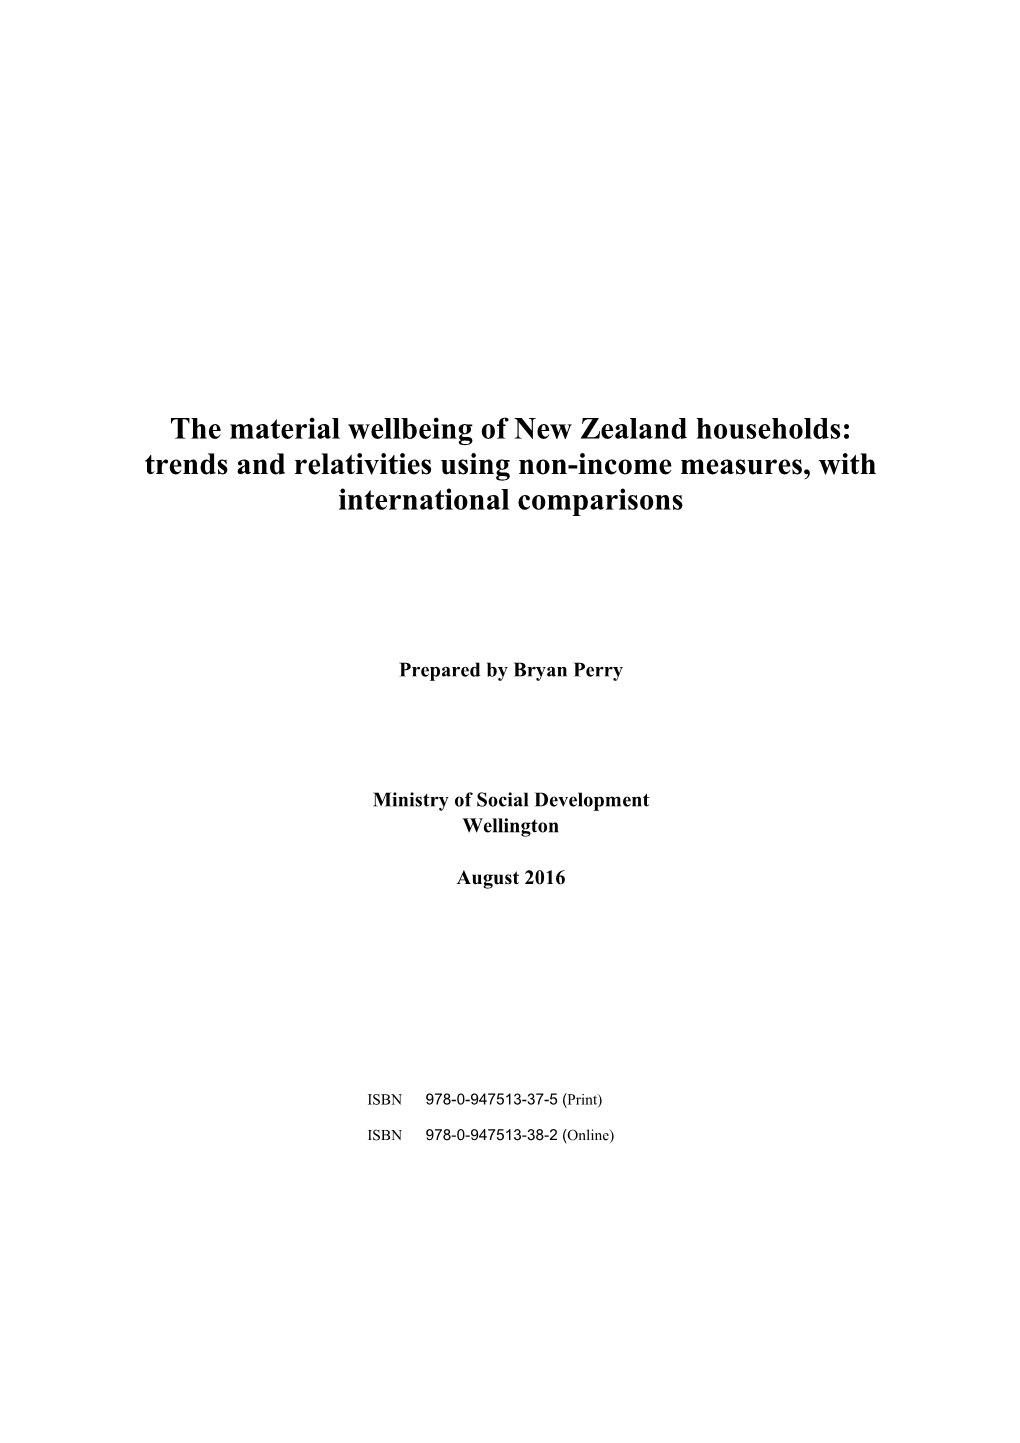 The Materialwellbeing of New Zealand Households:Trends and Relativities Using Non-Income